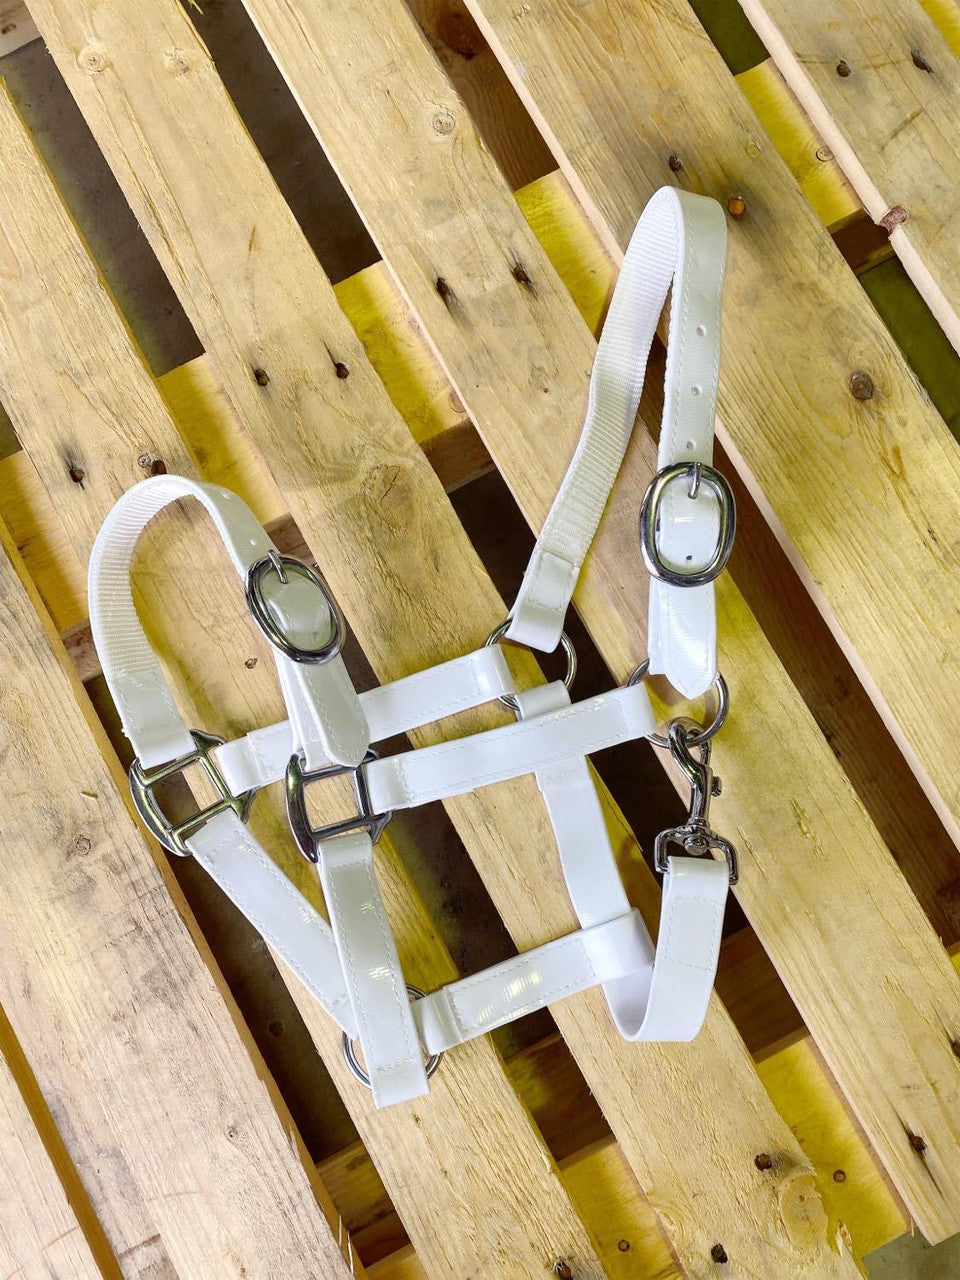 PVC Halter - White with Brass Buckles